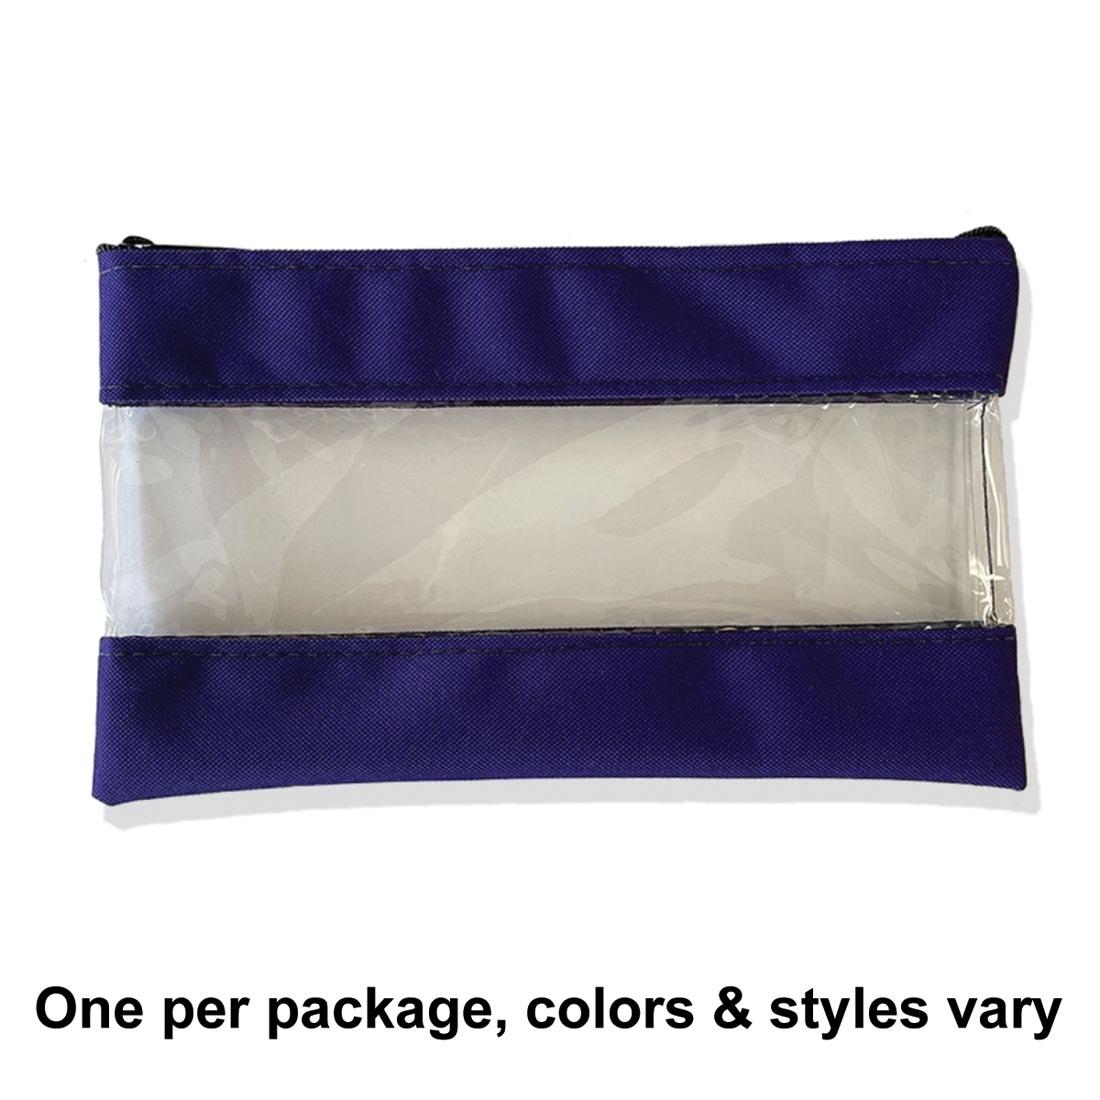 zippered storage bag with see-through strip in the middlezipper storage bag, with the words "One per package, colors & styles vary"